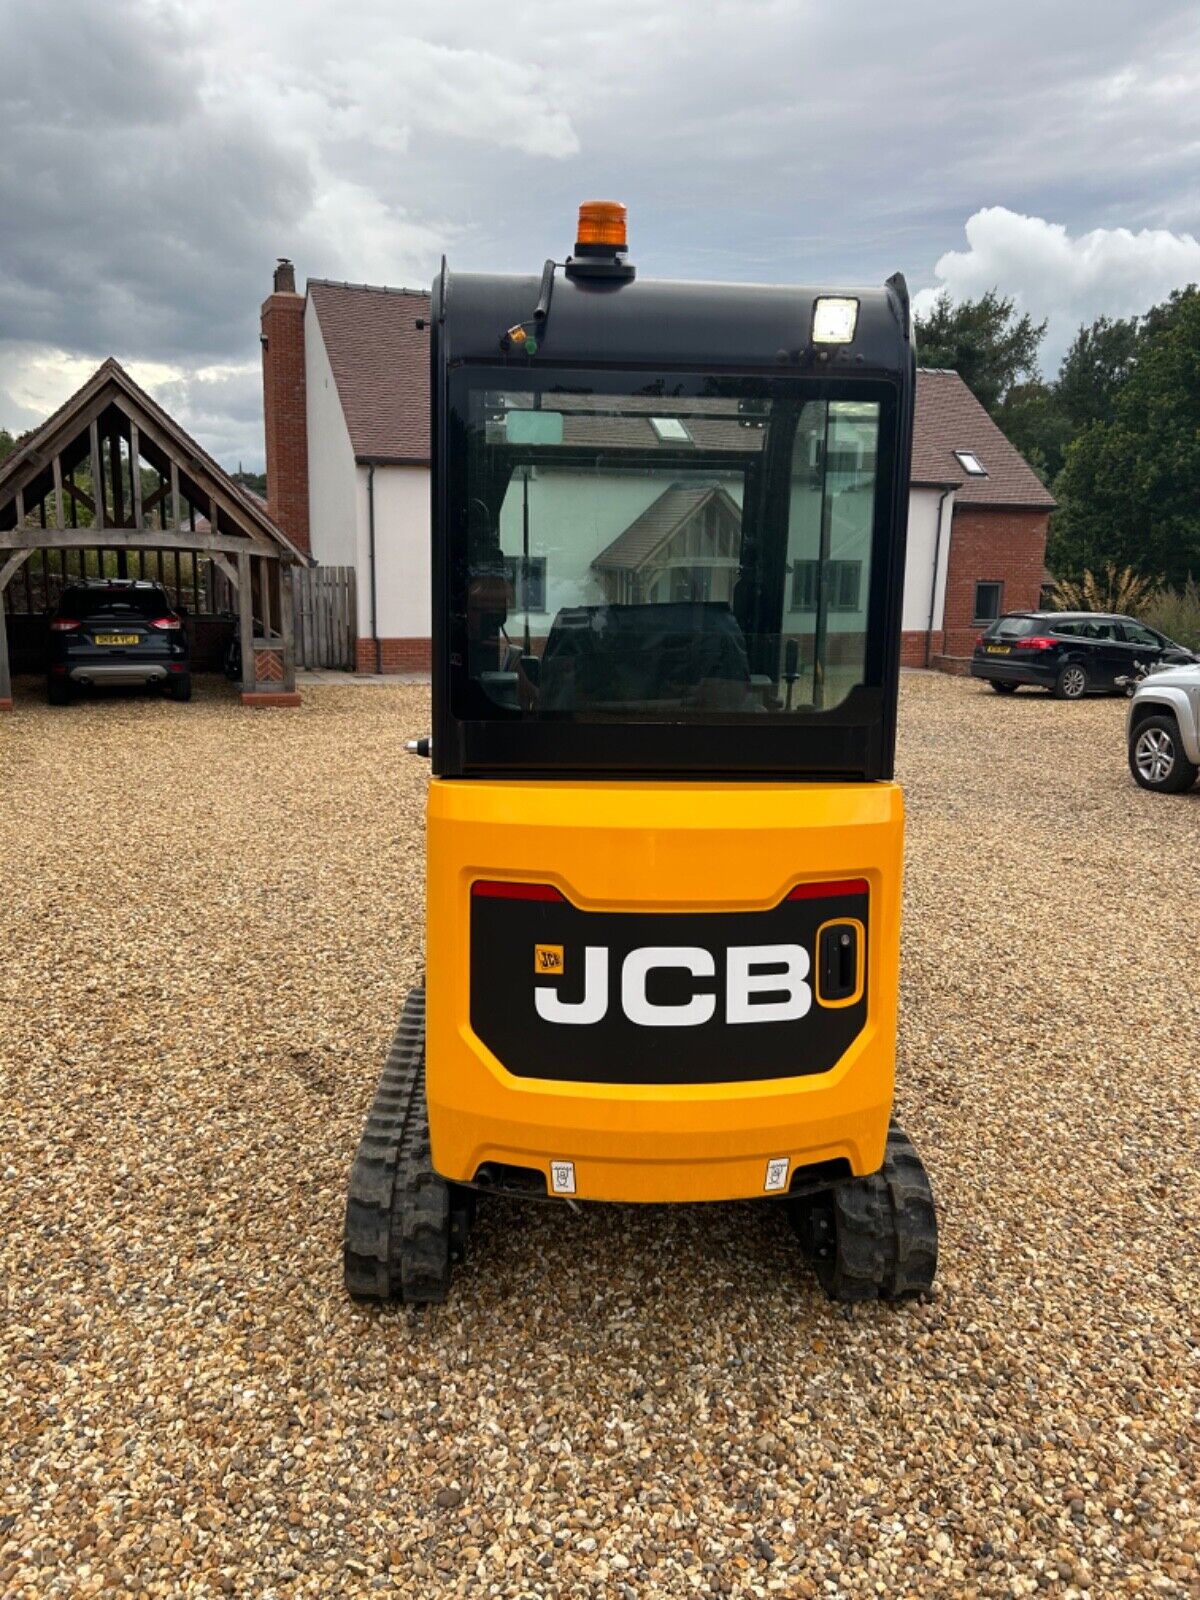 Bid on ALMOST NEW: 2022 JCB 16C-1 DIGGER WITH ONLY 160 HOURS- Buy &amp; Sell on Auction with EAMA Group